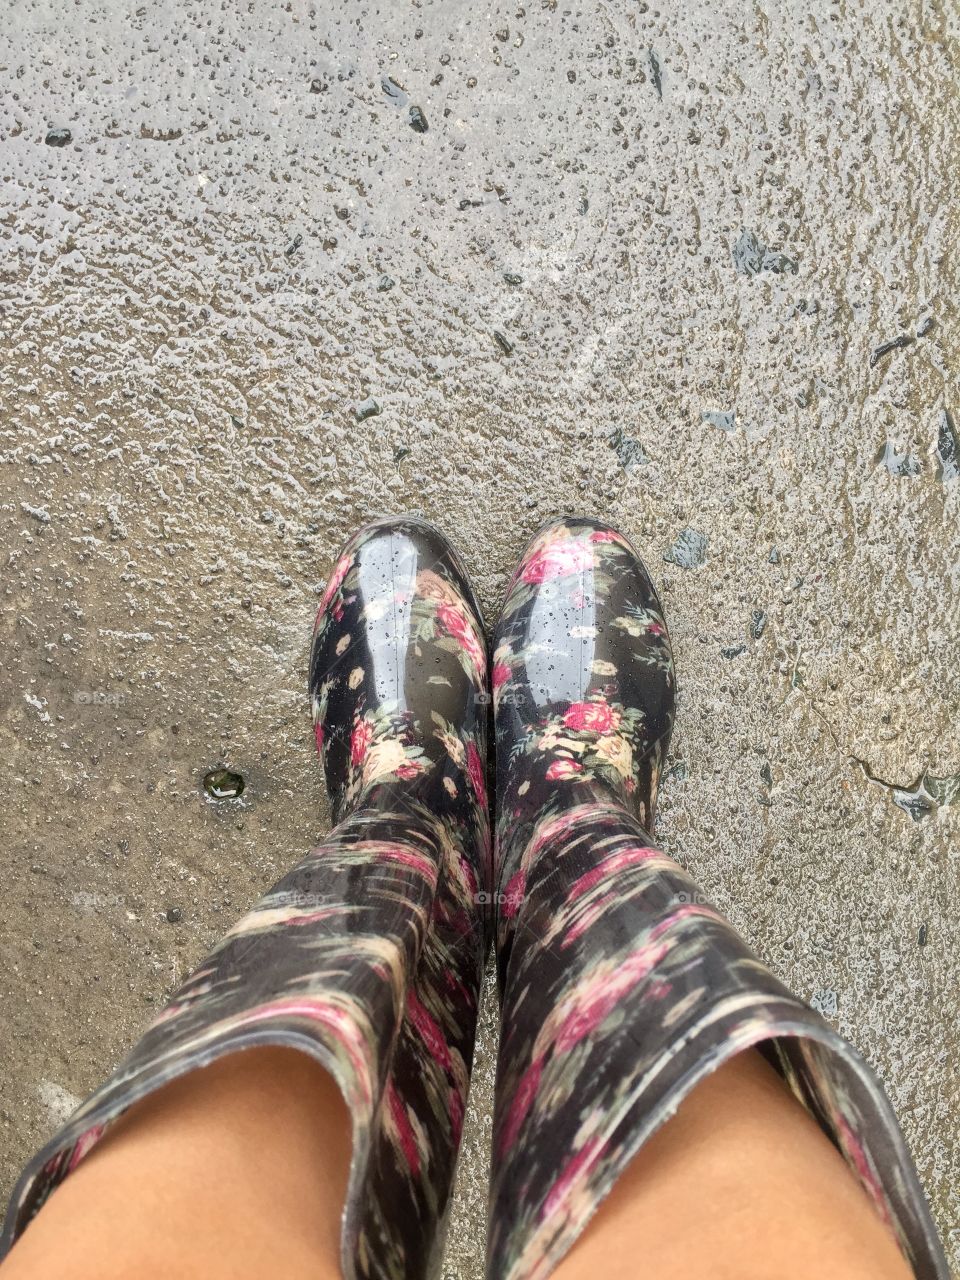 Floral boots for a rainy day.